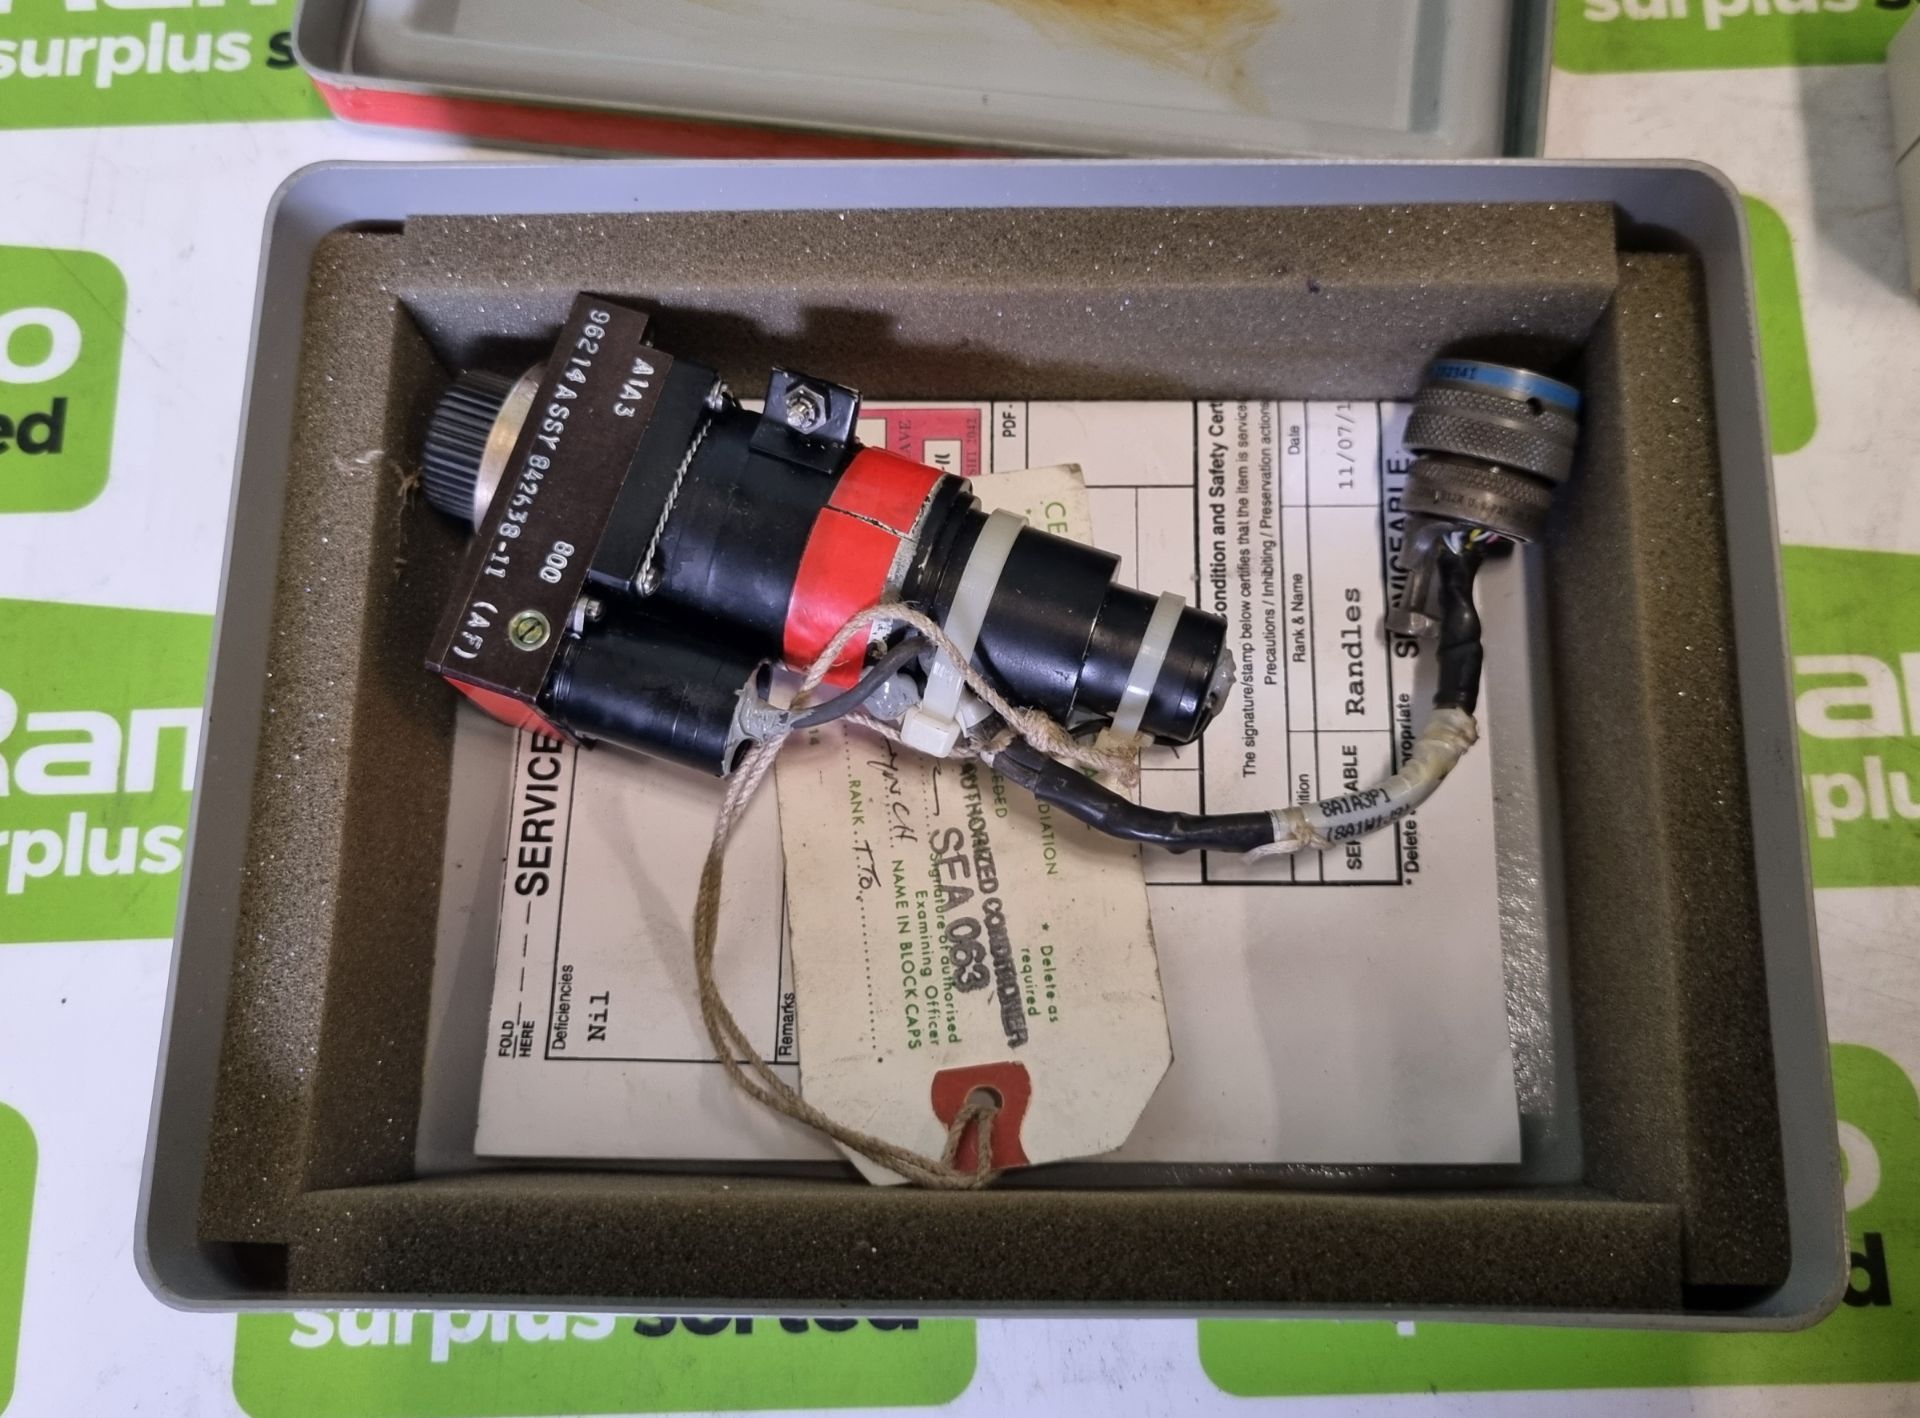 Azimuth actuator sealand - Boxed, Pressure gauge, VELS system BCU-611 battery pack - Image 4 of 4